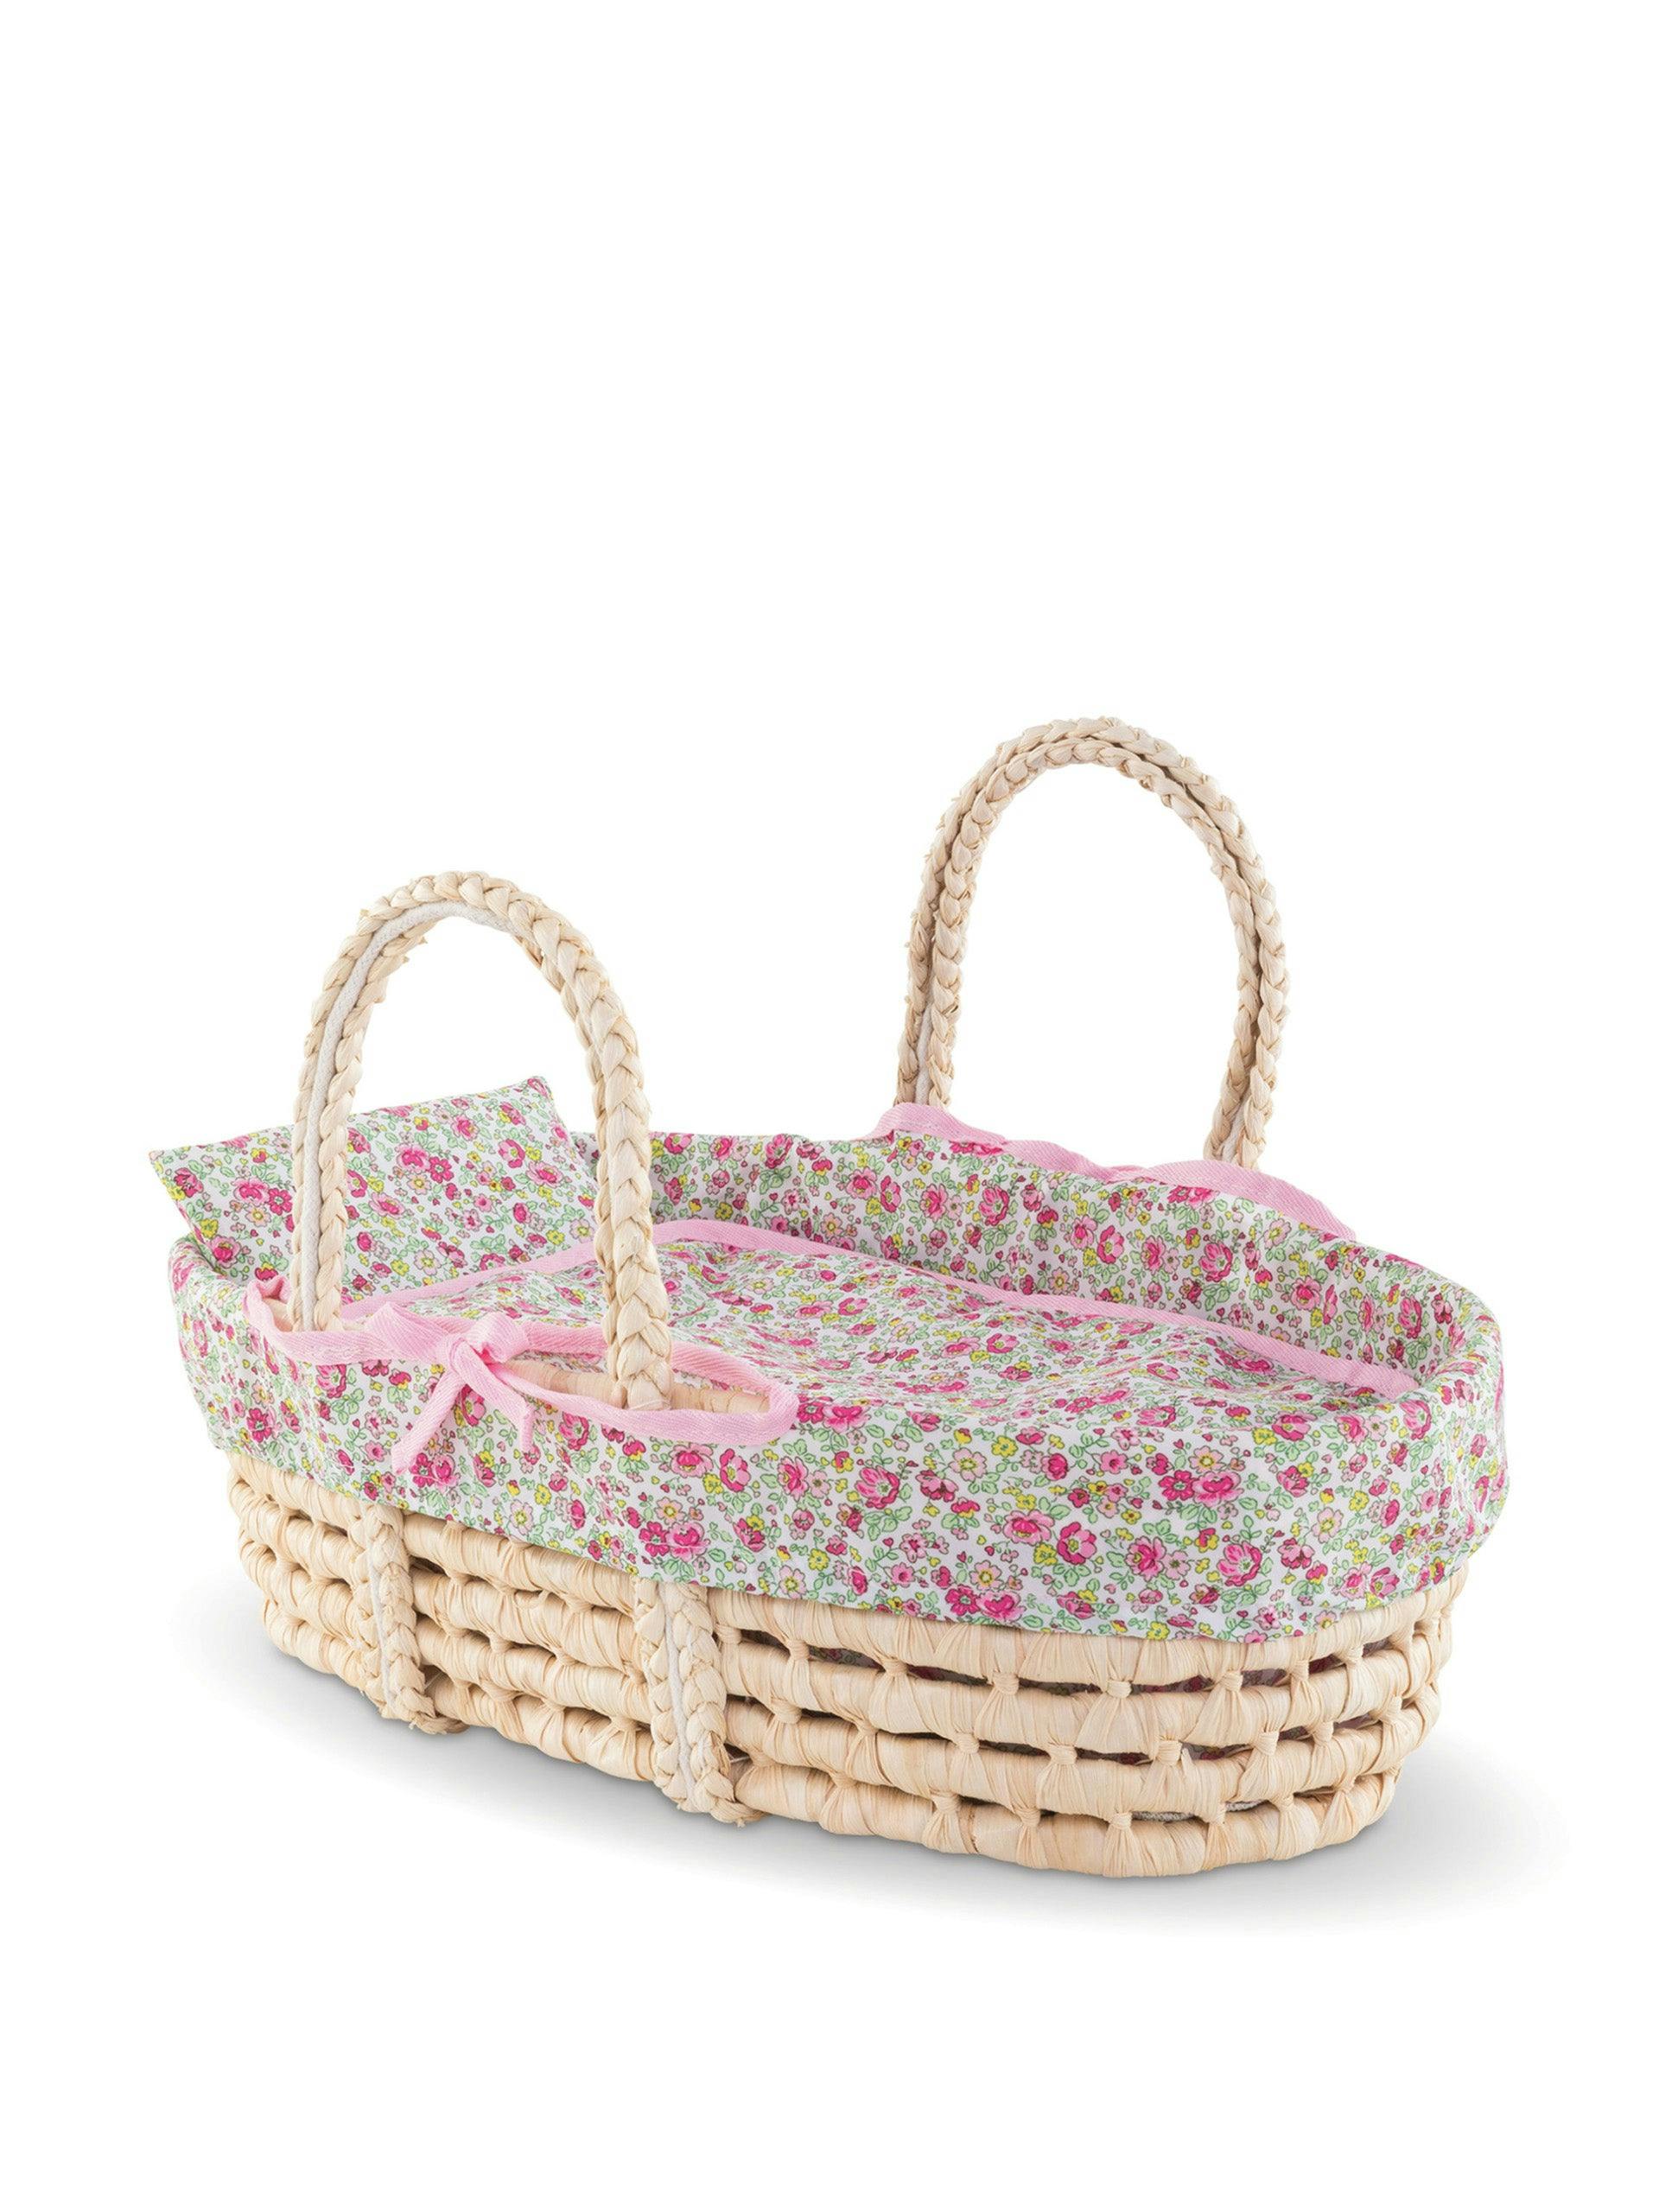 Braided doll’s Moses basket and accessories